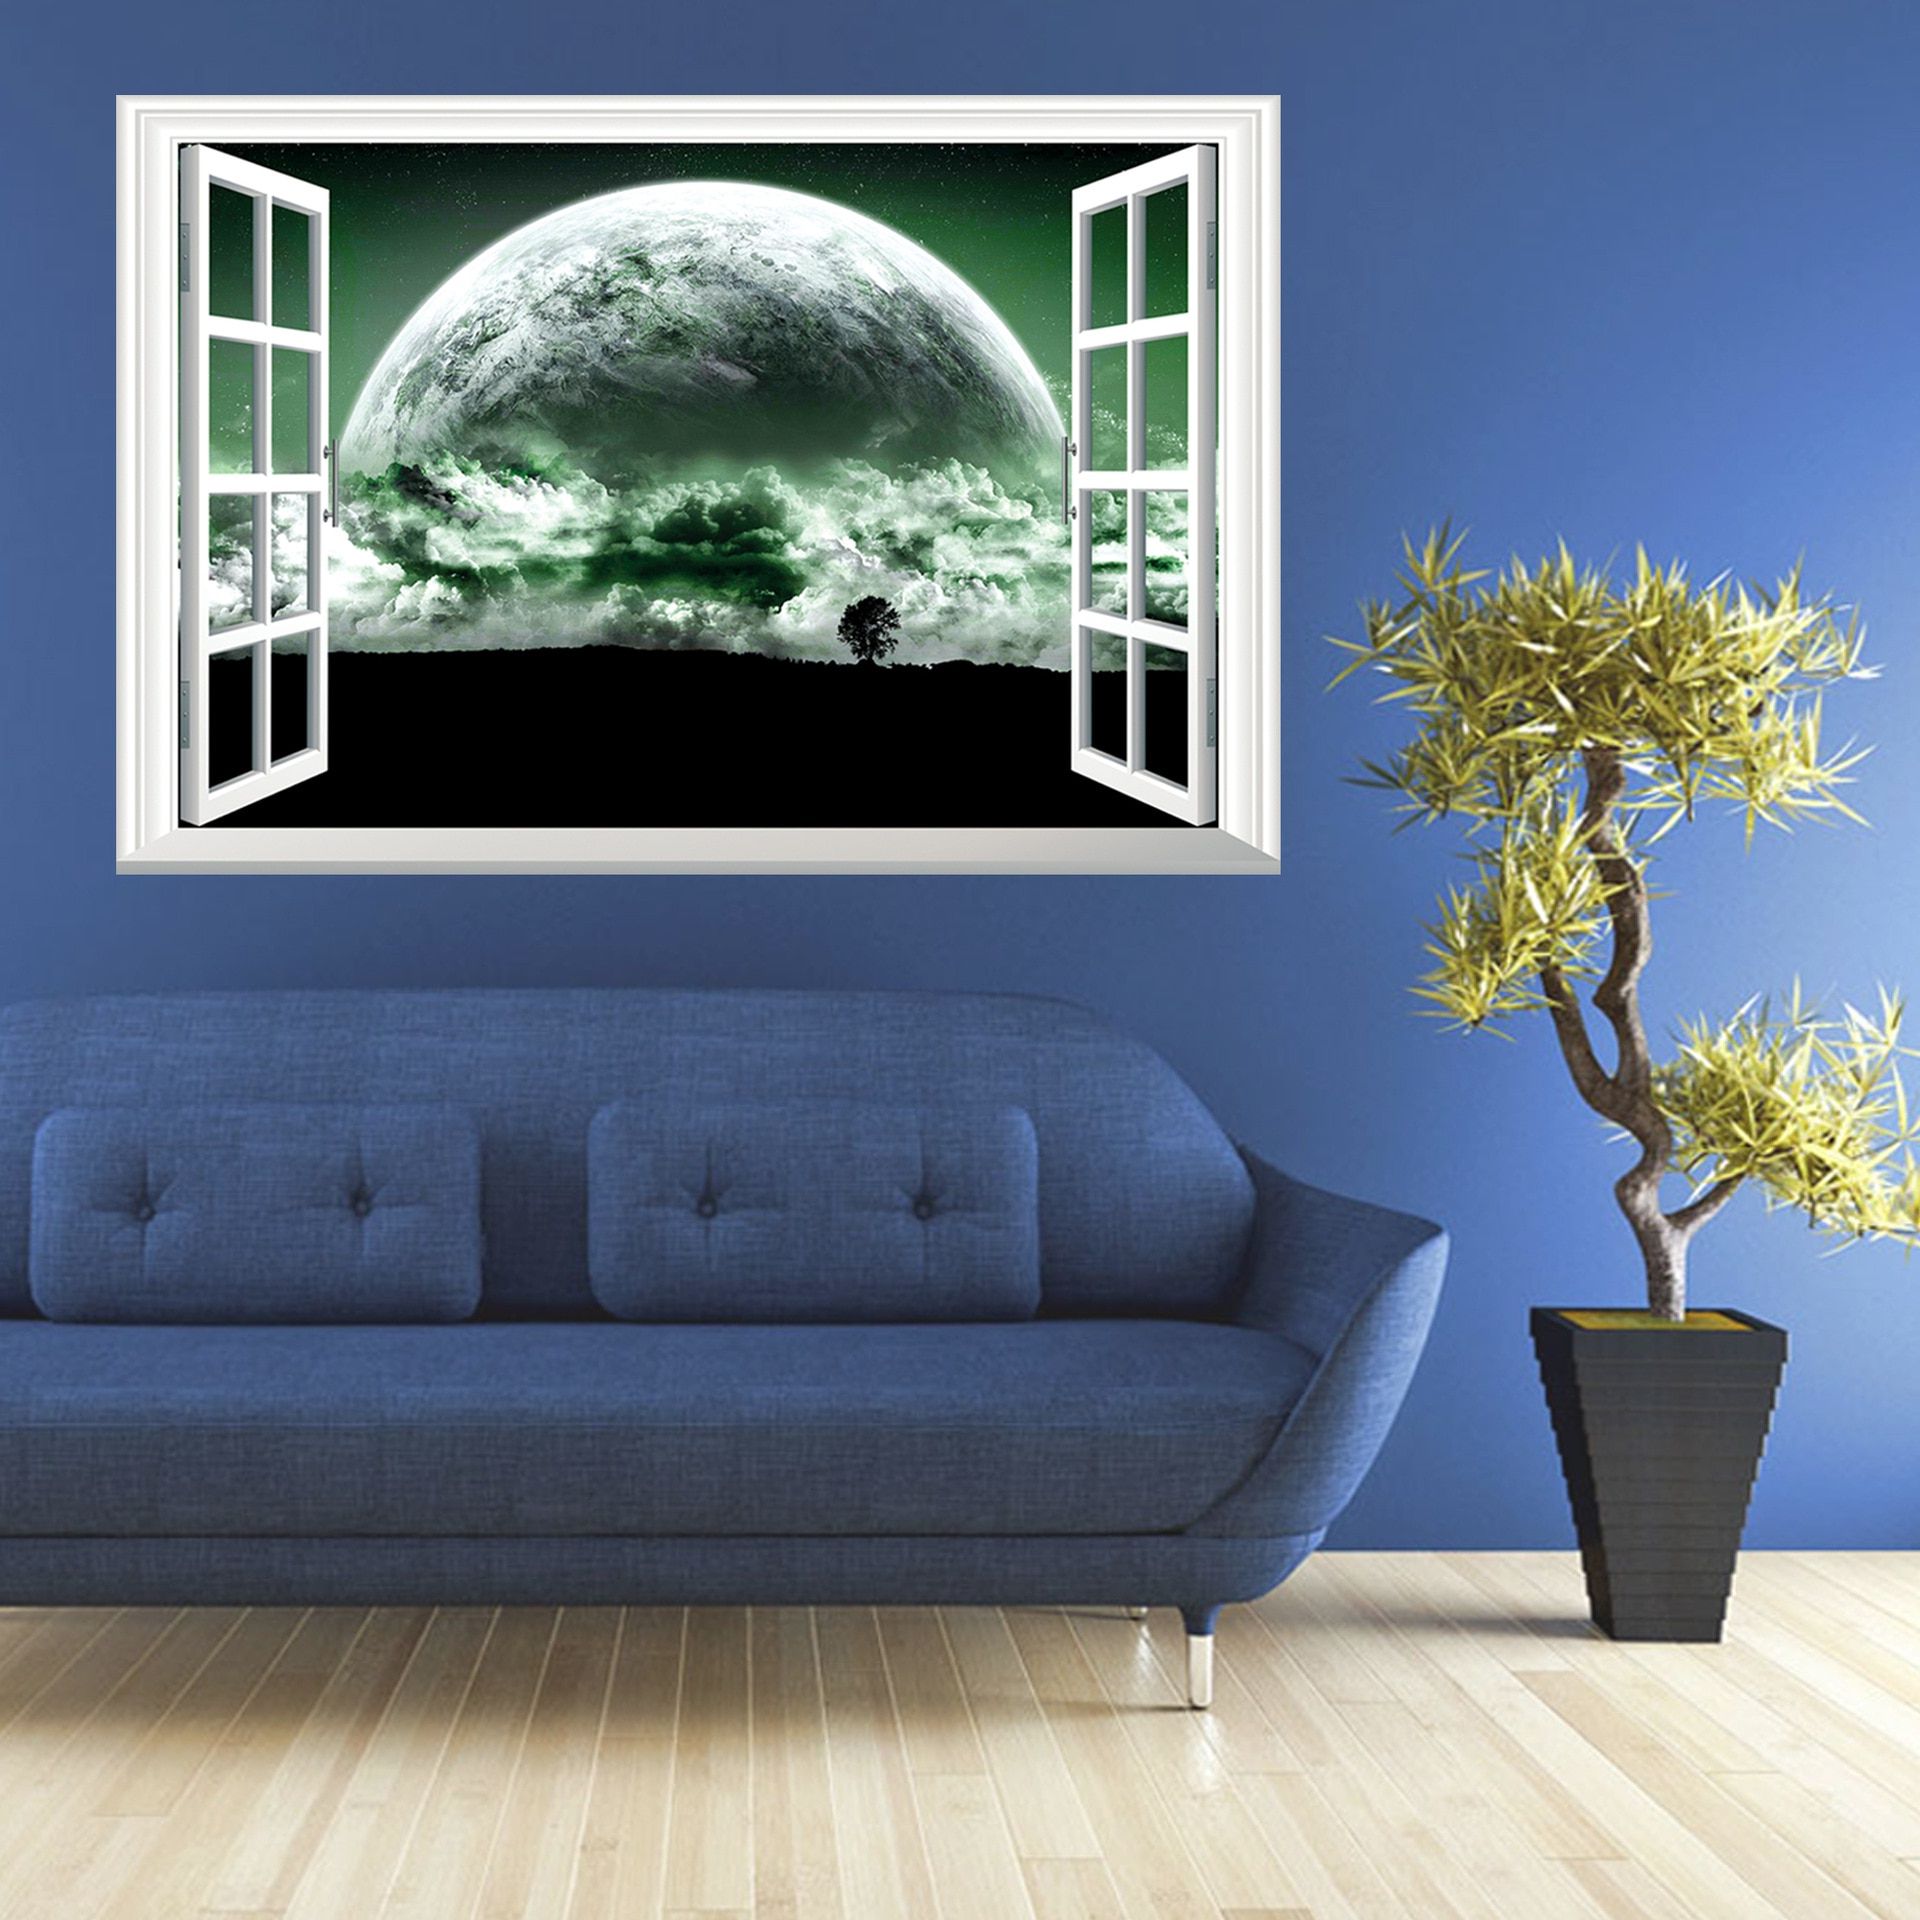 3d Galaxy Wall Sticker Outer Space Planet Stickers With Well Known Stripes Wall Art (View 4 of 20)